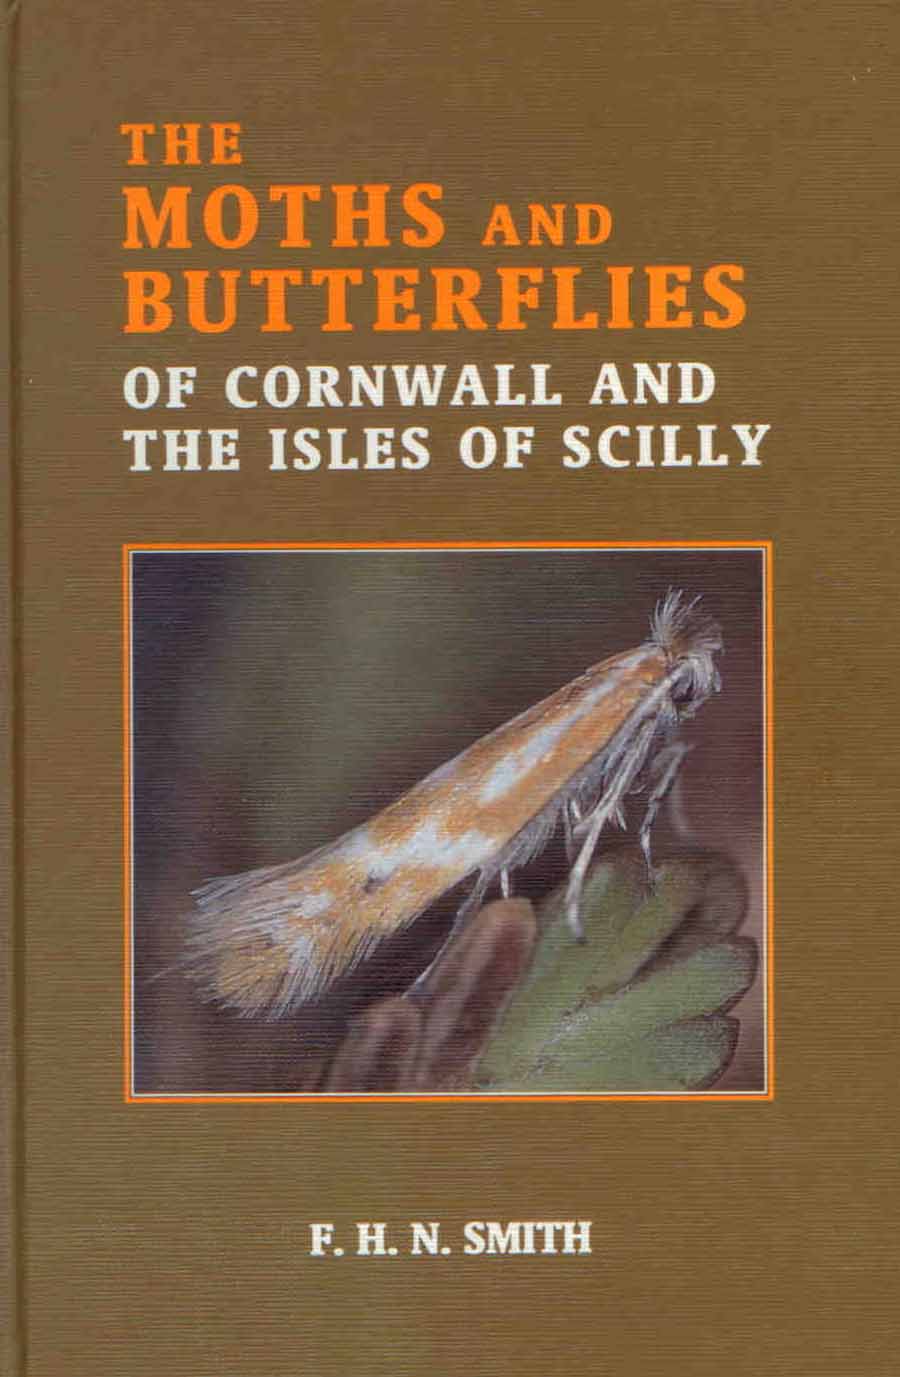 Smith, F.H.N. - The Moths and Butterflies of Cornwall and the Isles of Scilly